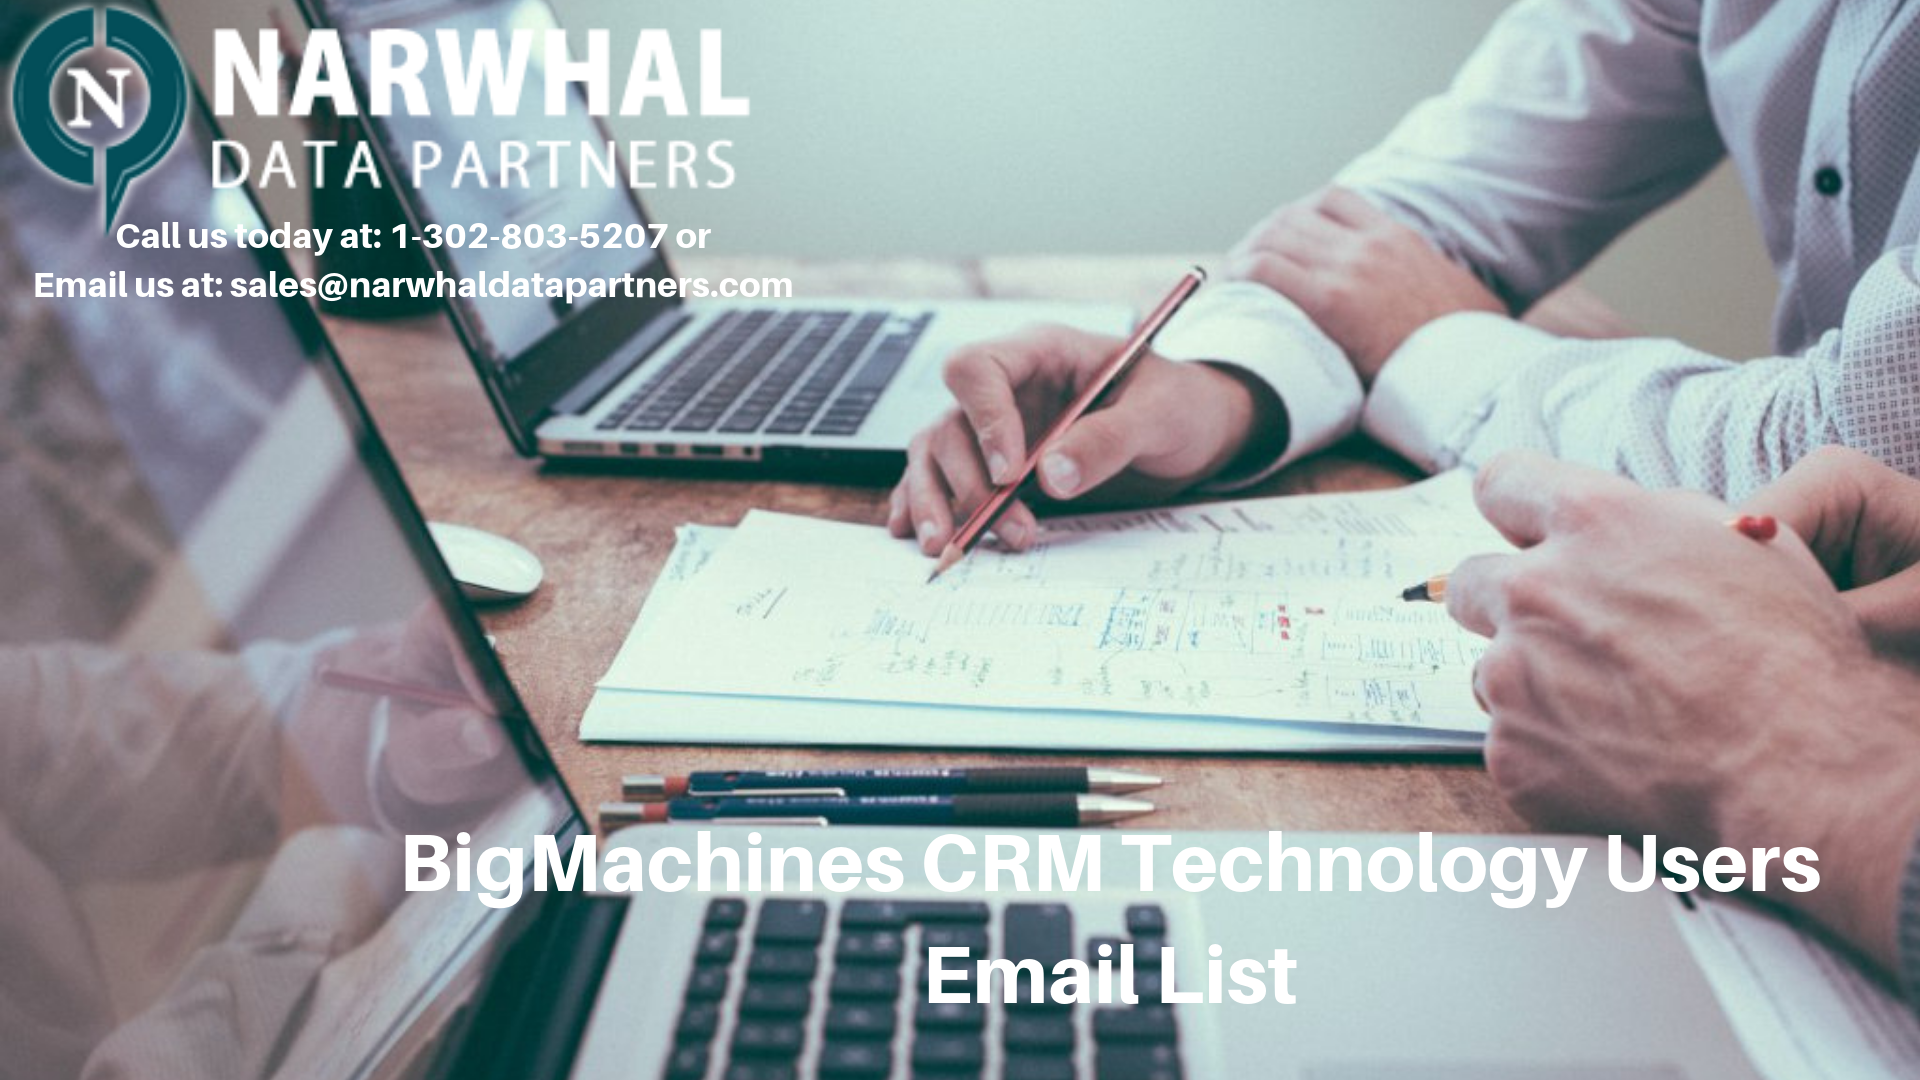 http://narwhaldatapartners.com/bigmachines-crm-technology-users-email-list.html